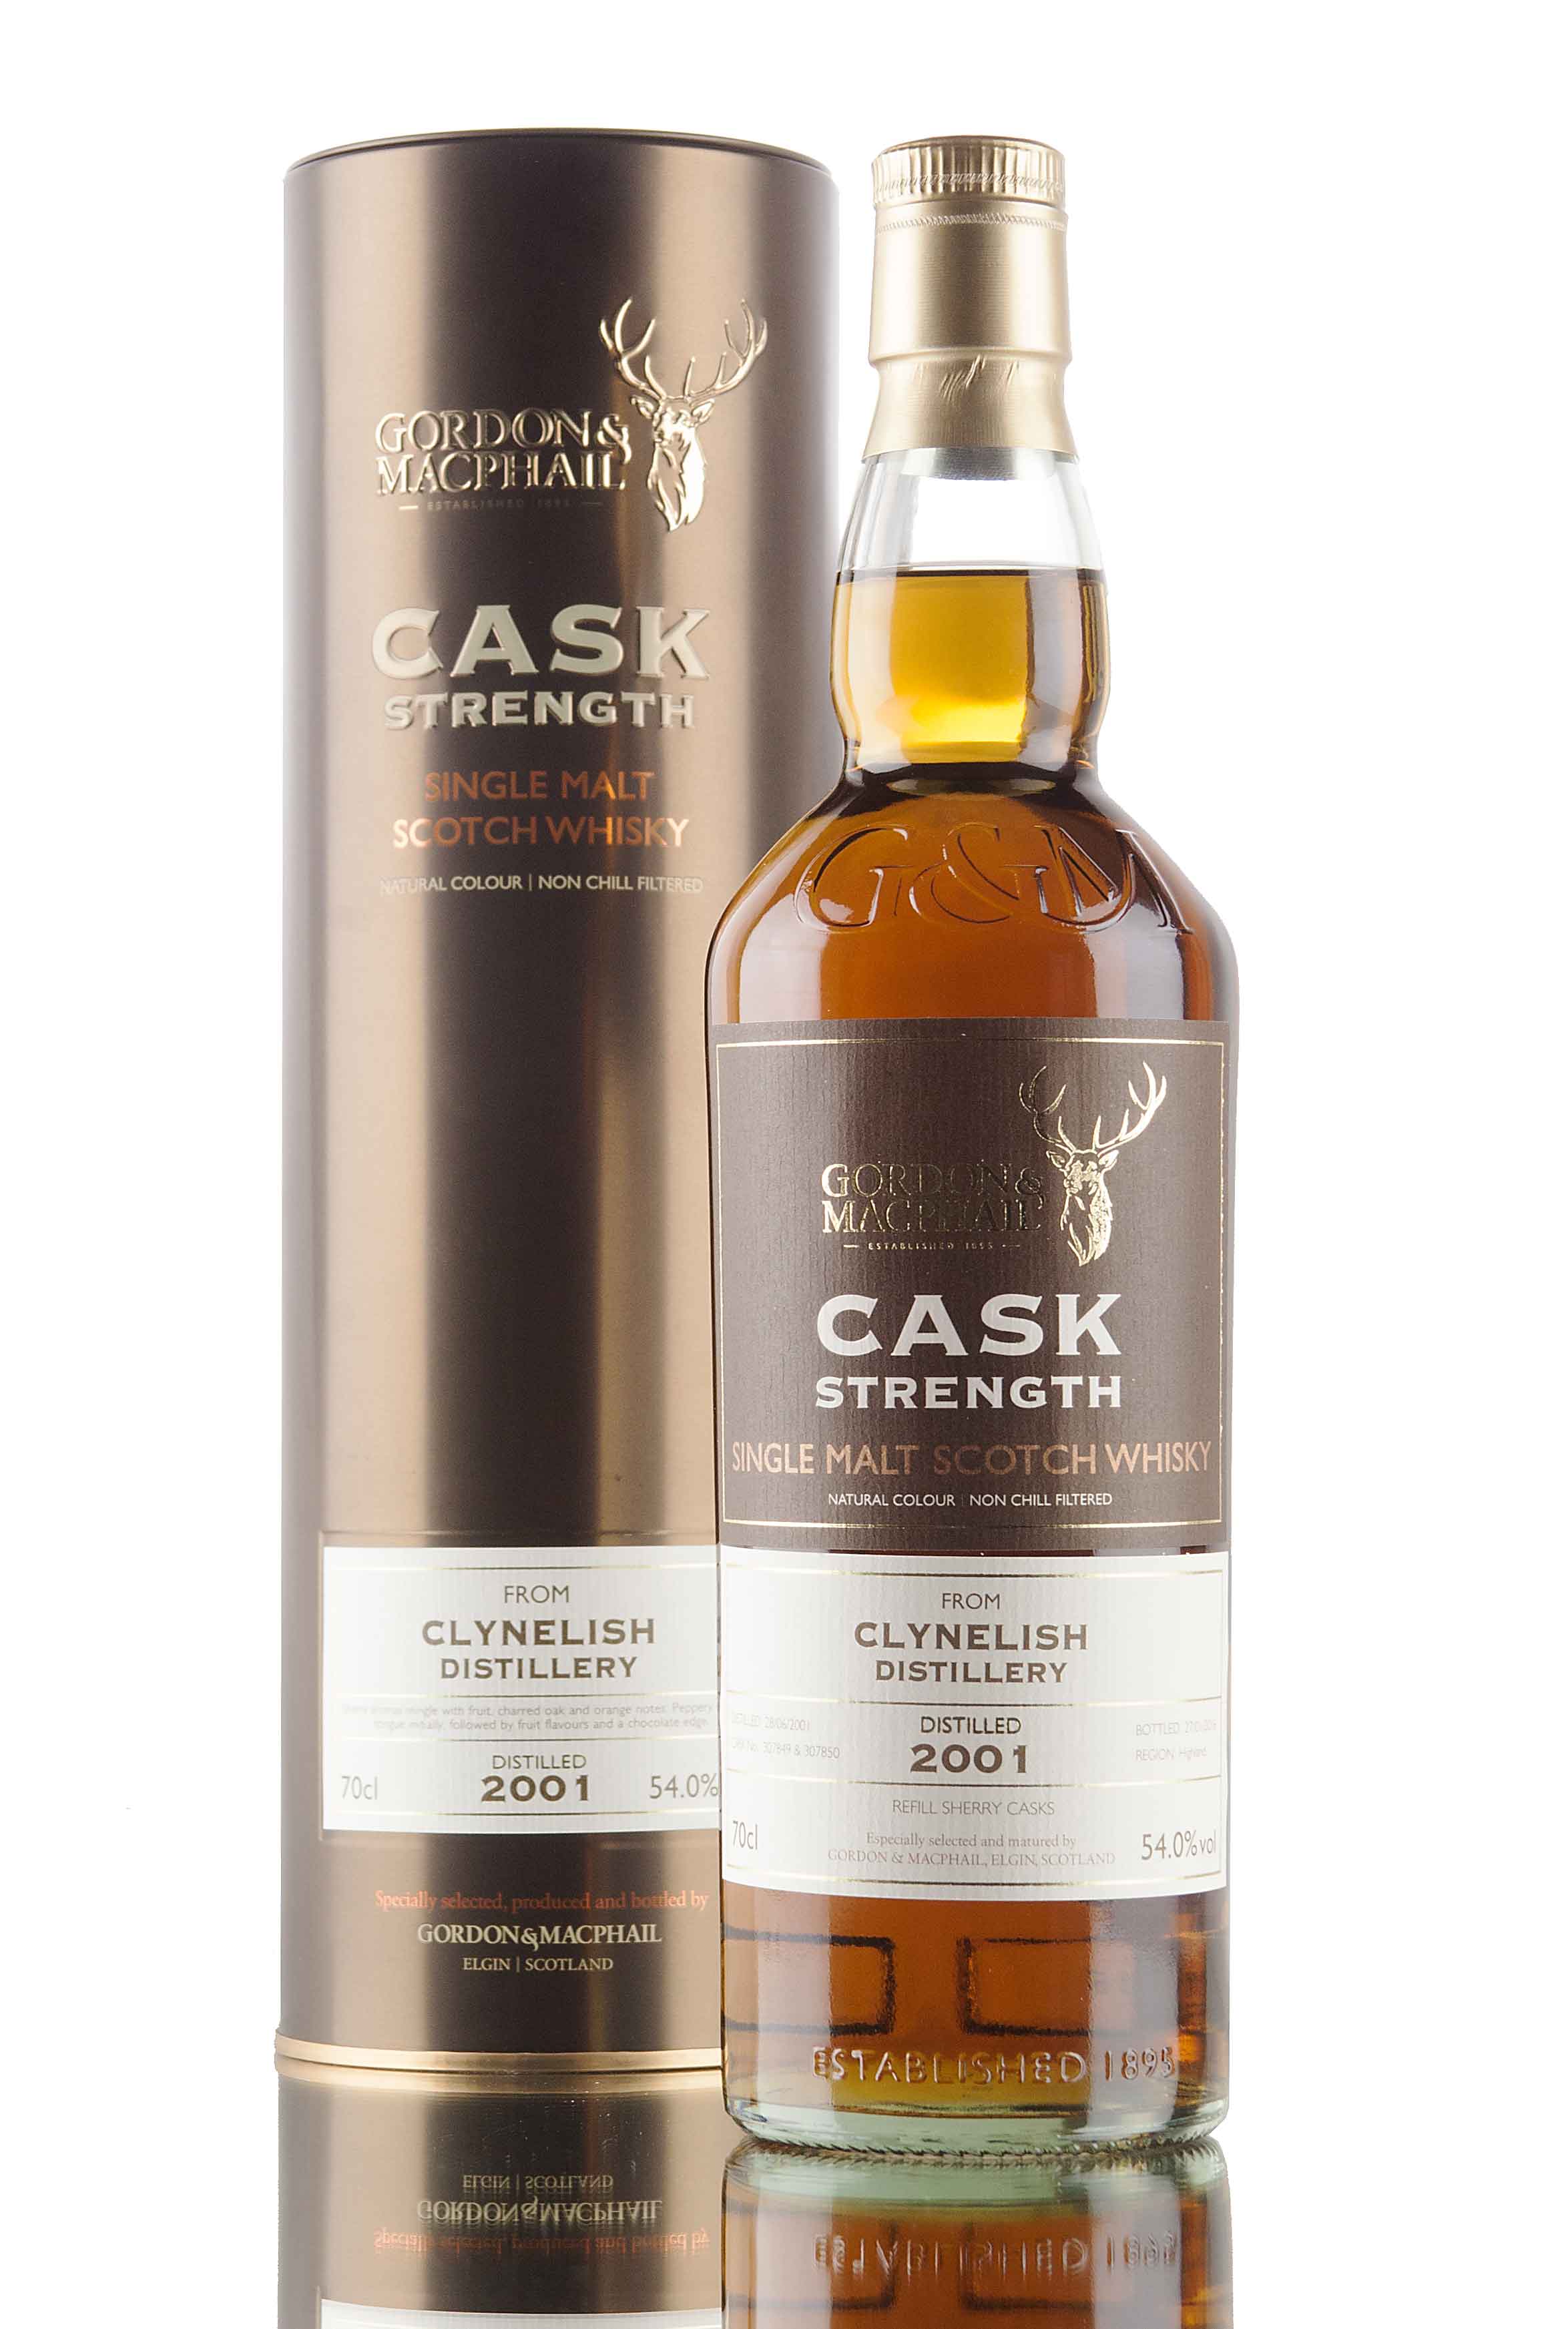 Clynelish 14 Year Old - 2001 / Cask Strength (G&M)